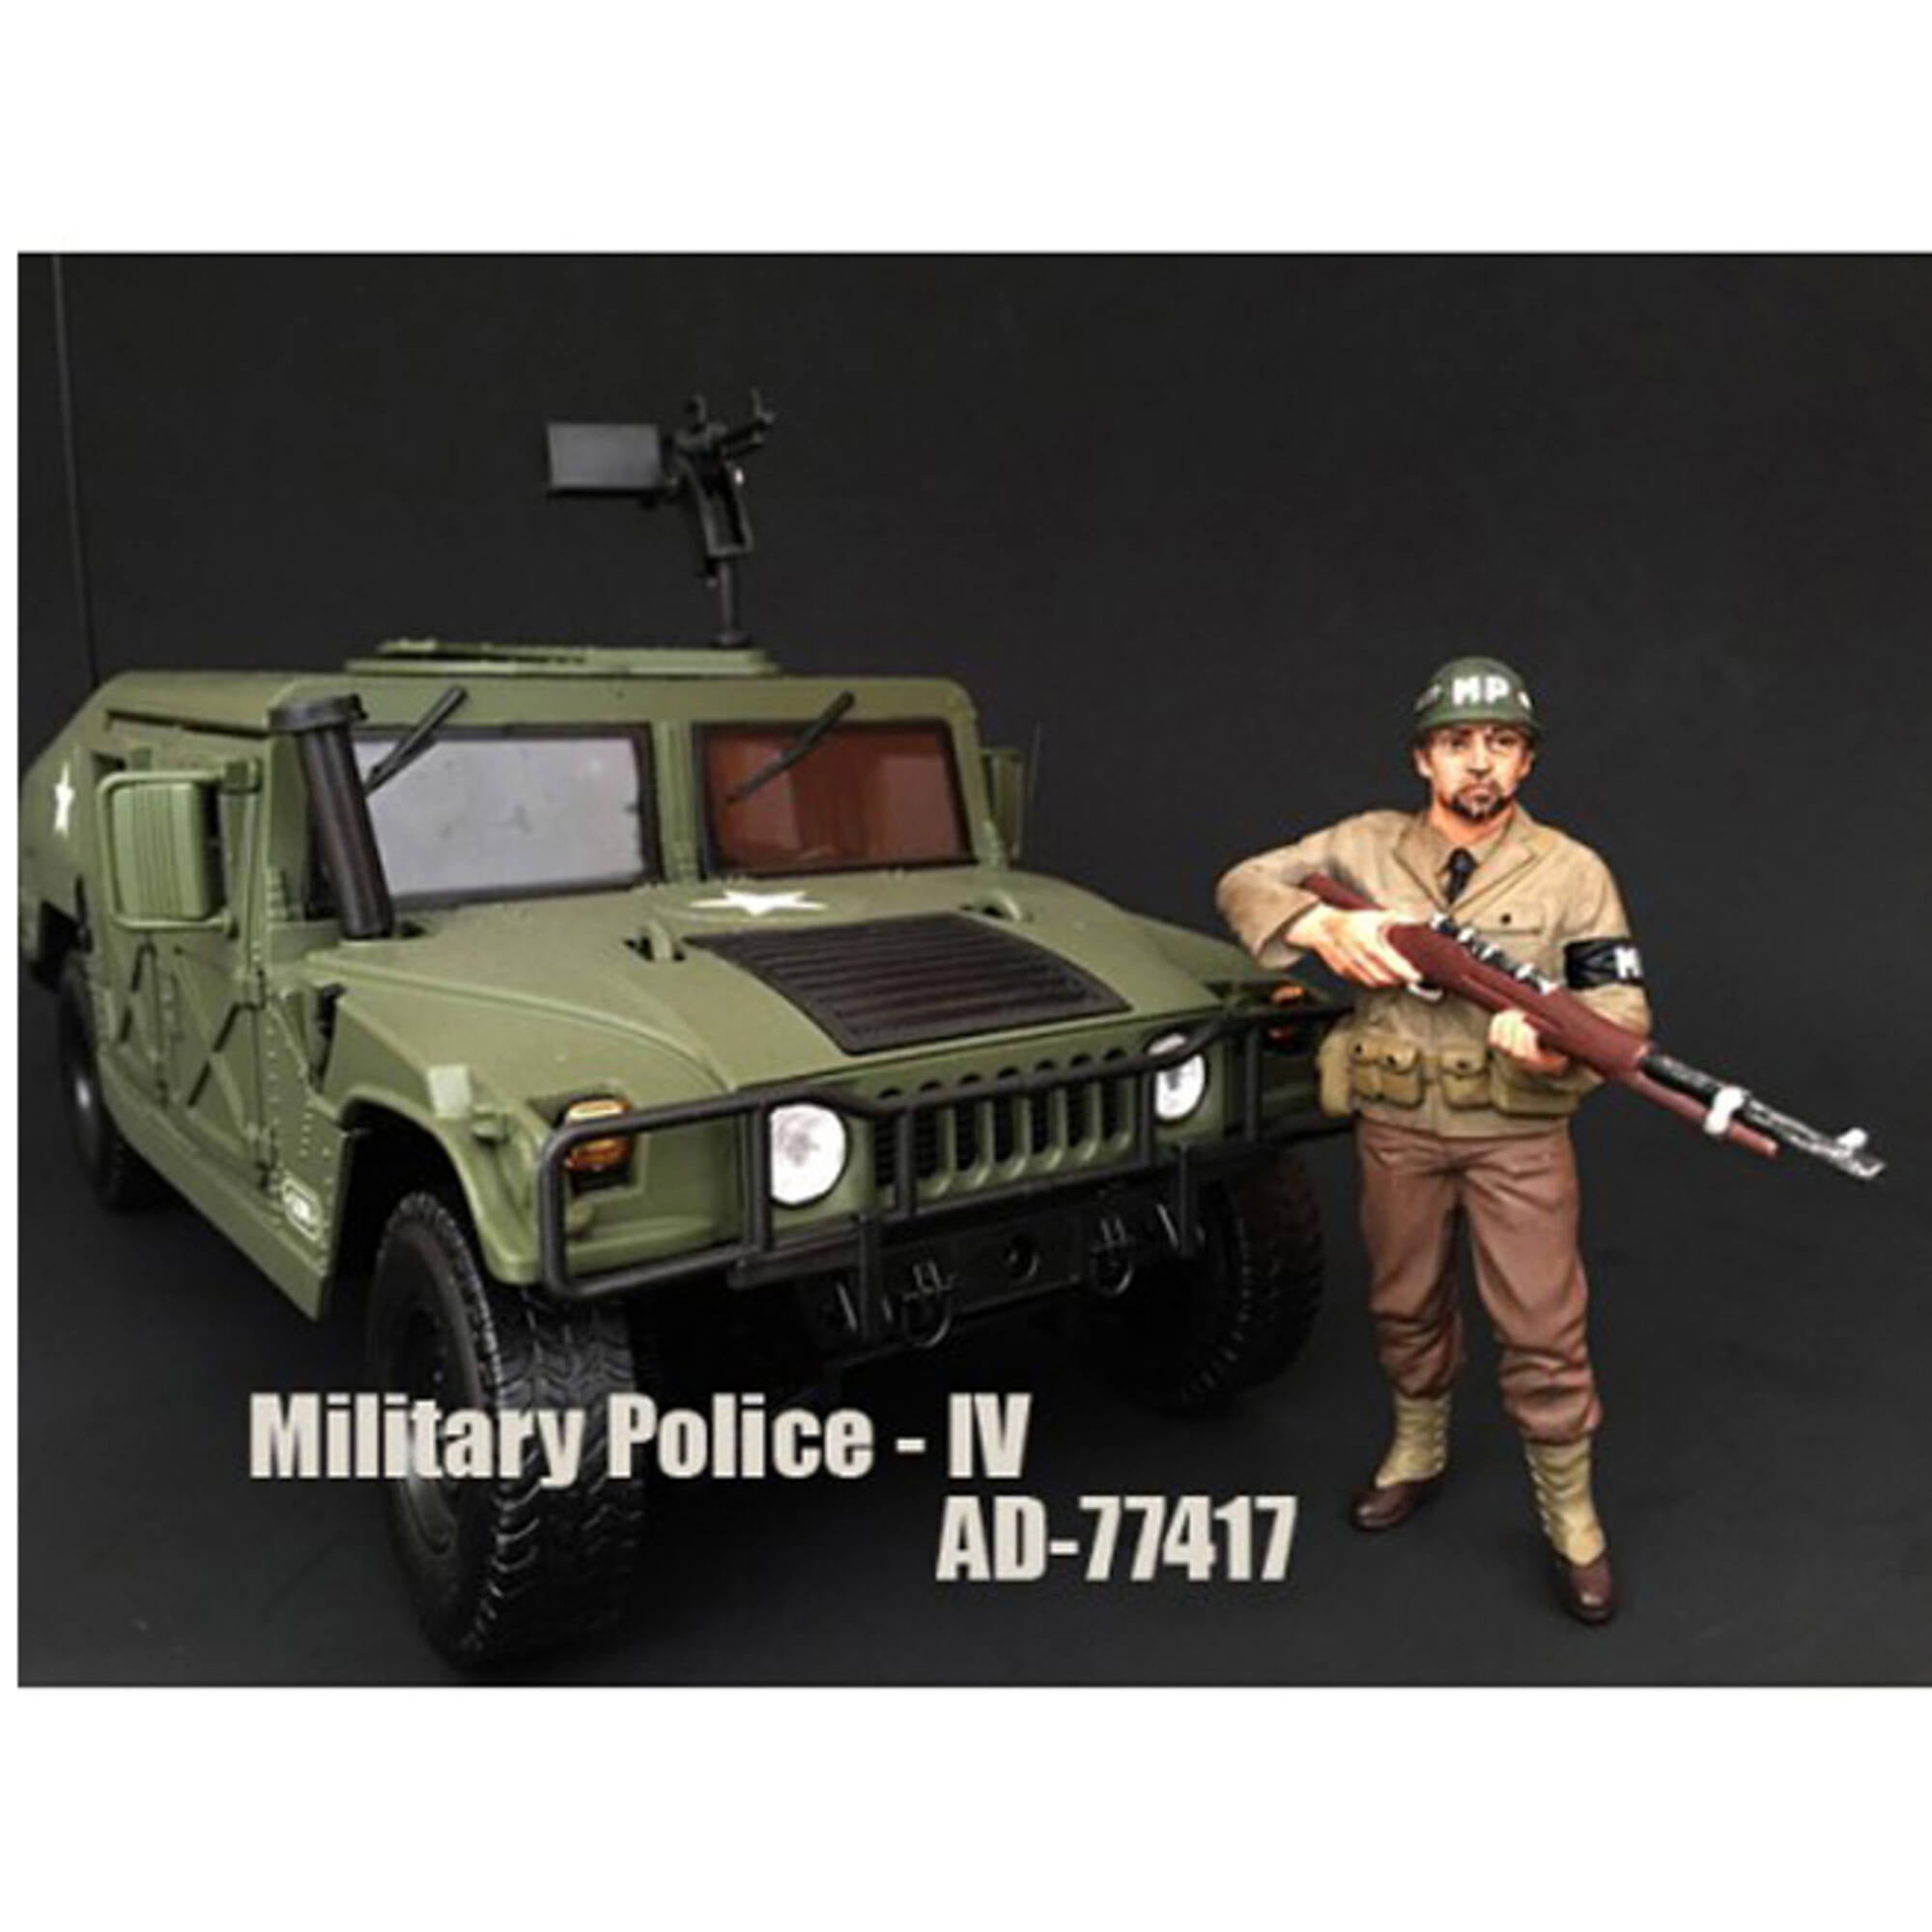 77417 Wwii Military Police Figure Iv For 1-18 Scale Models